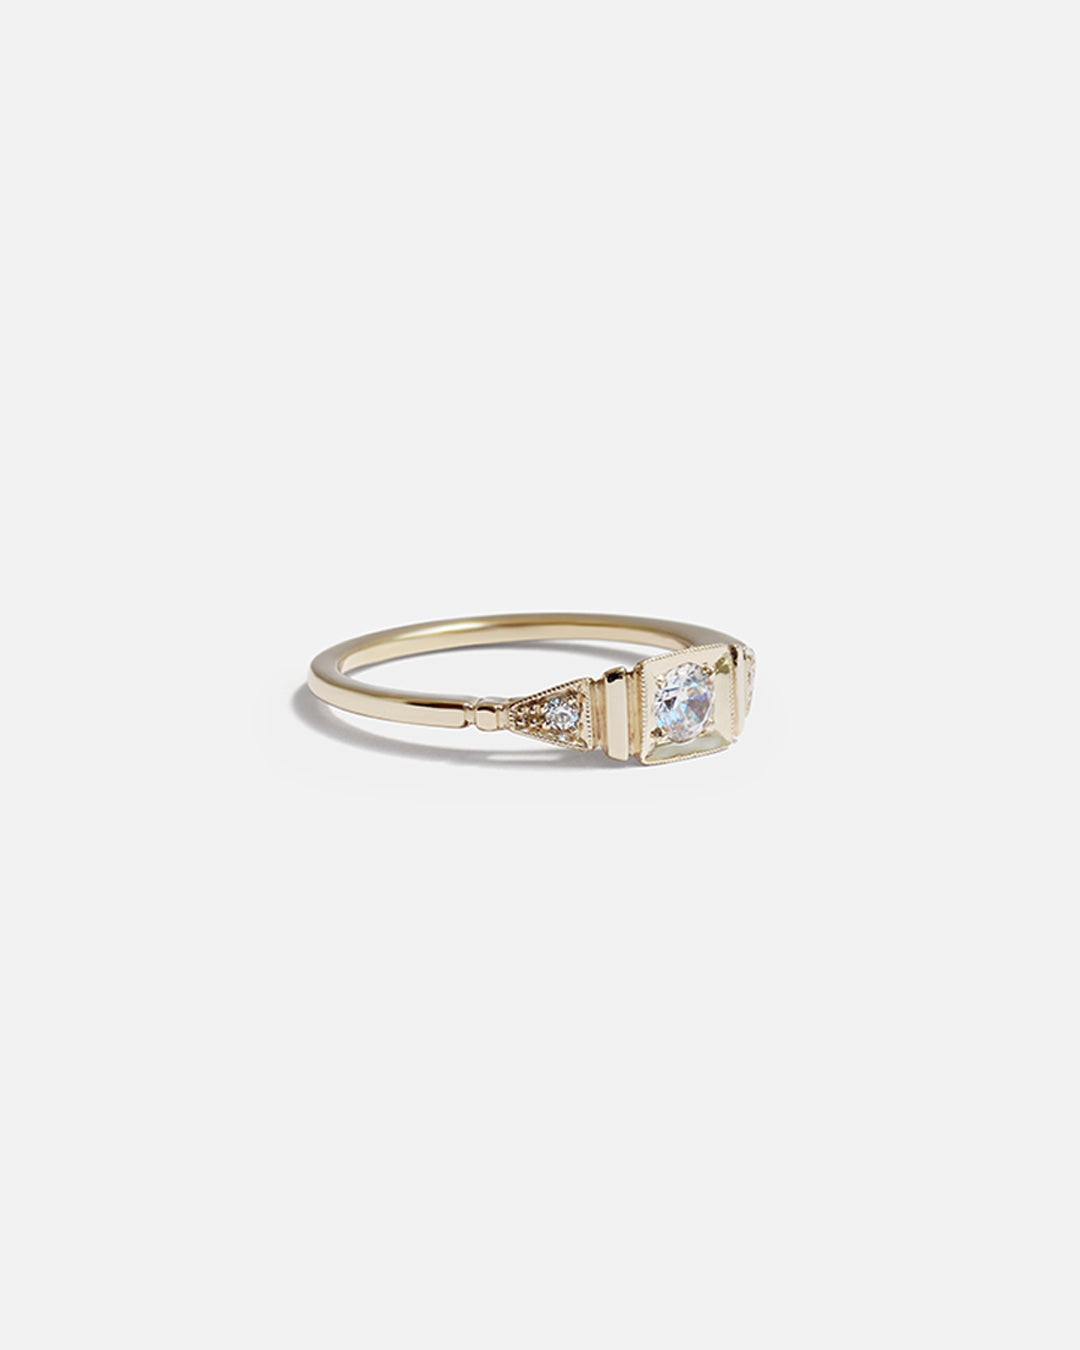 Ella Ring / White Diamonds By Katrina La Penne in Engagement Rings Category